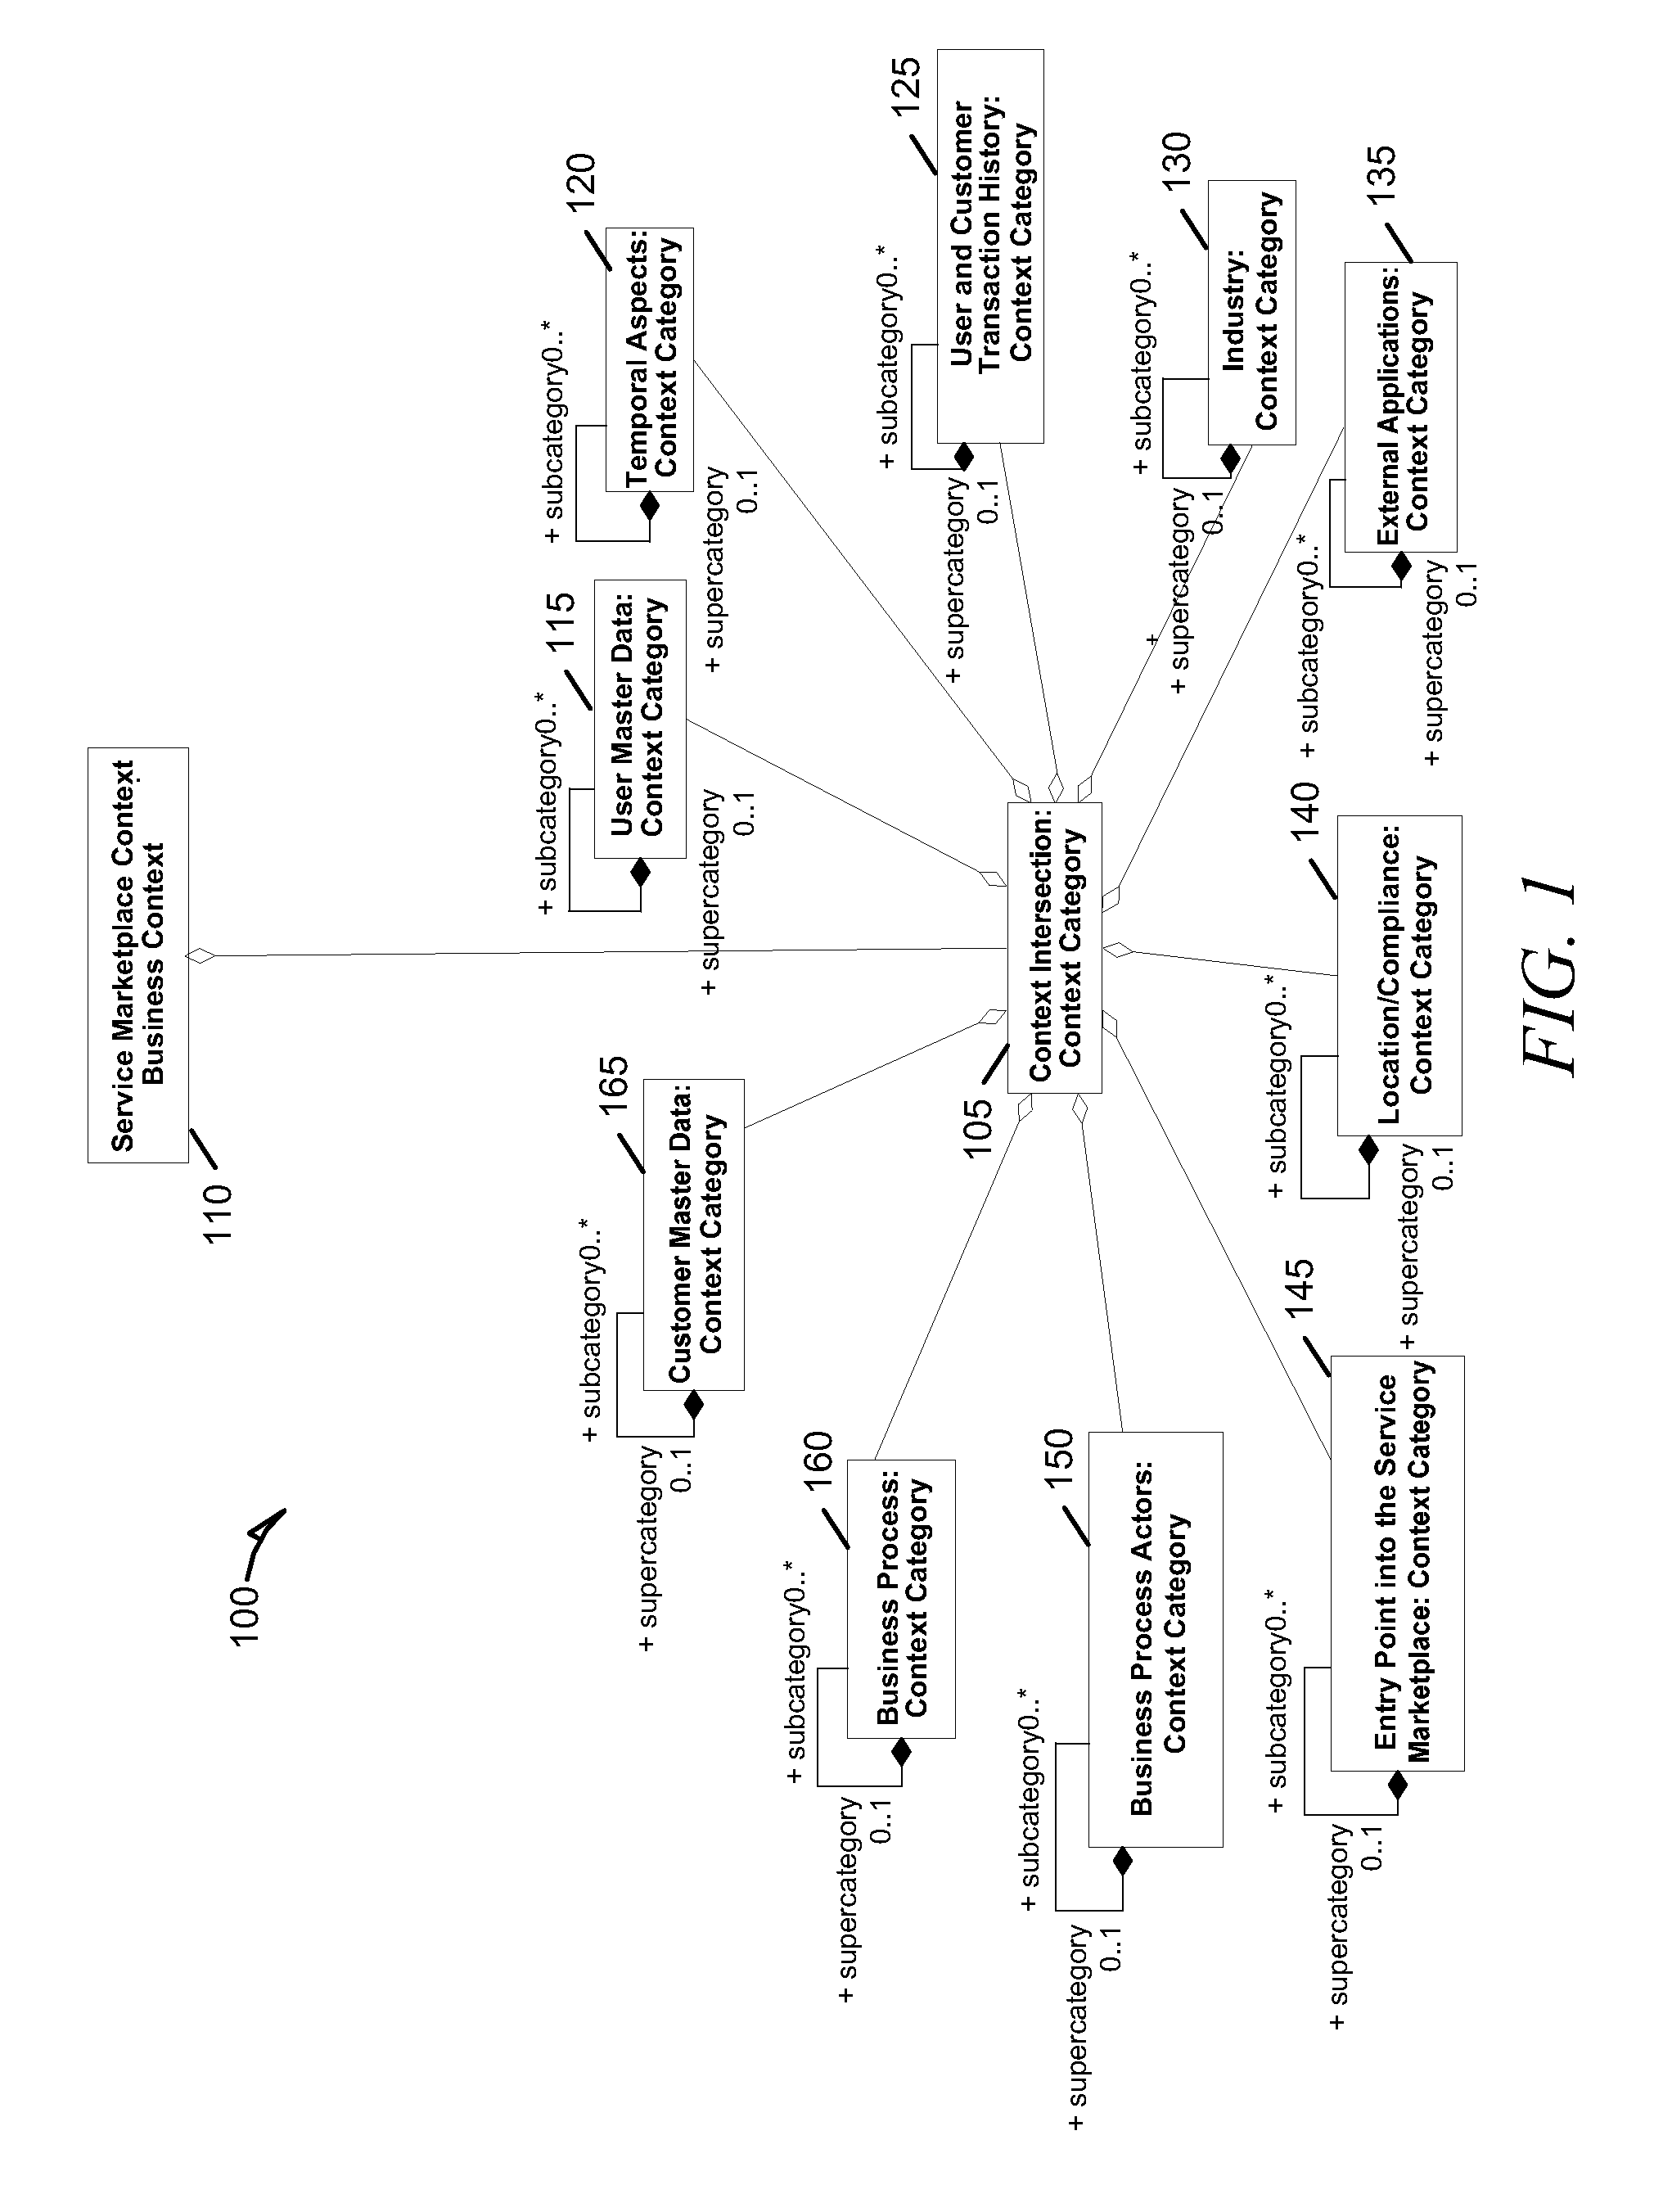 Systems and methods for dynamic process model reconfiguration based on process execution context